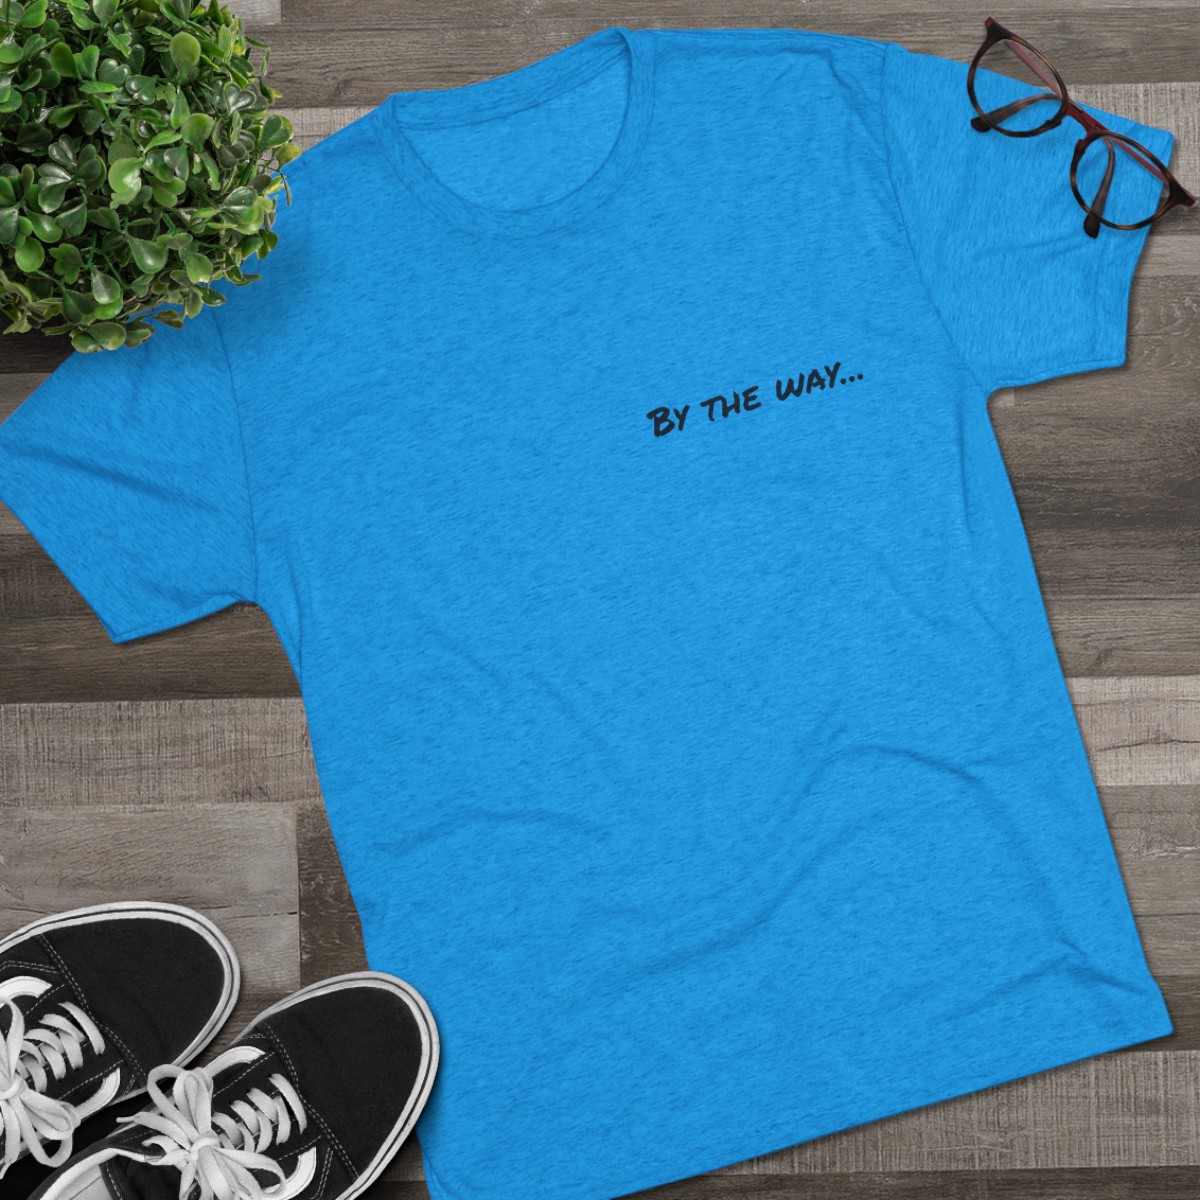 By the way...God doesn't change! : Unisex Tri-Blend Crew Tee product thumbnail image